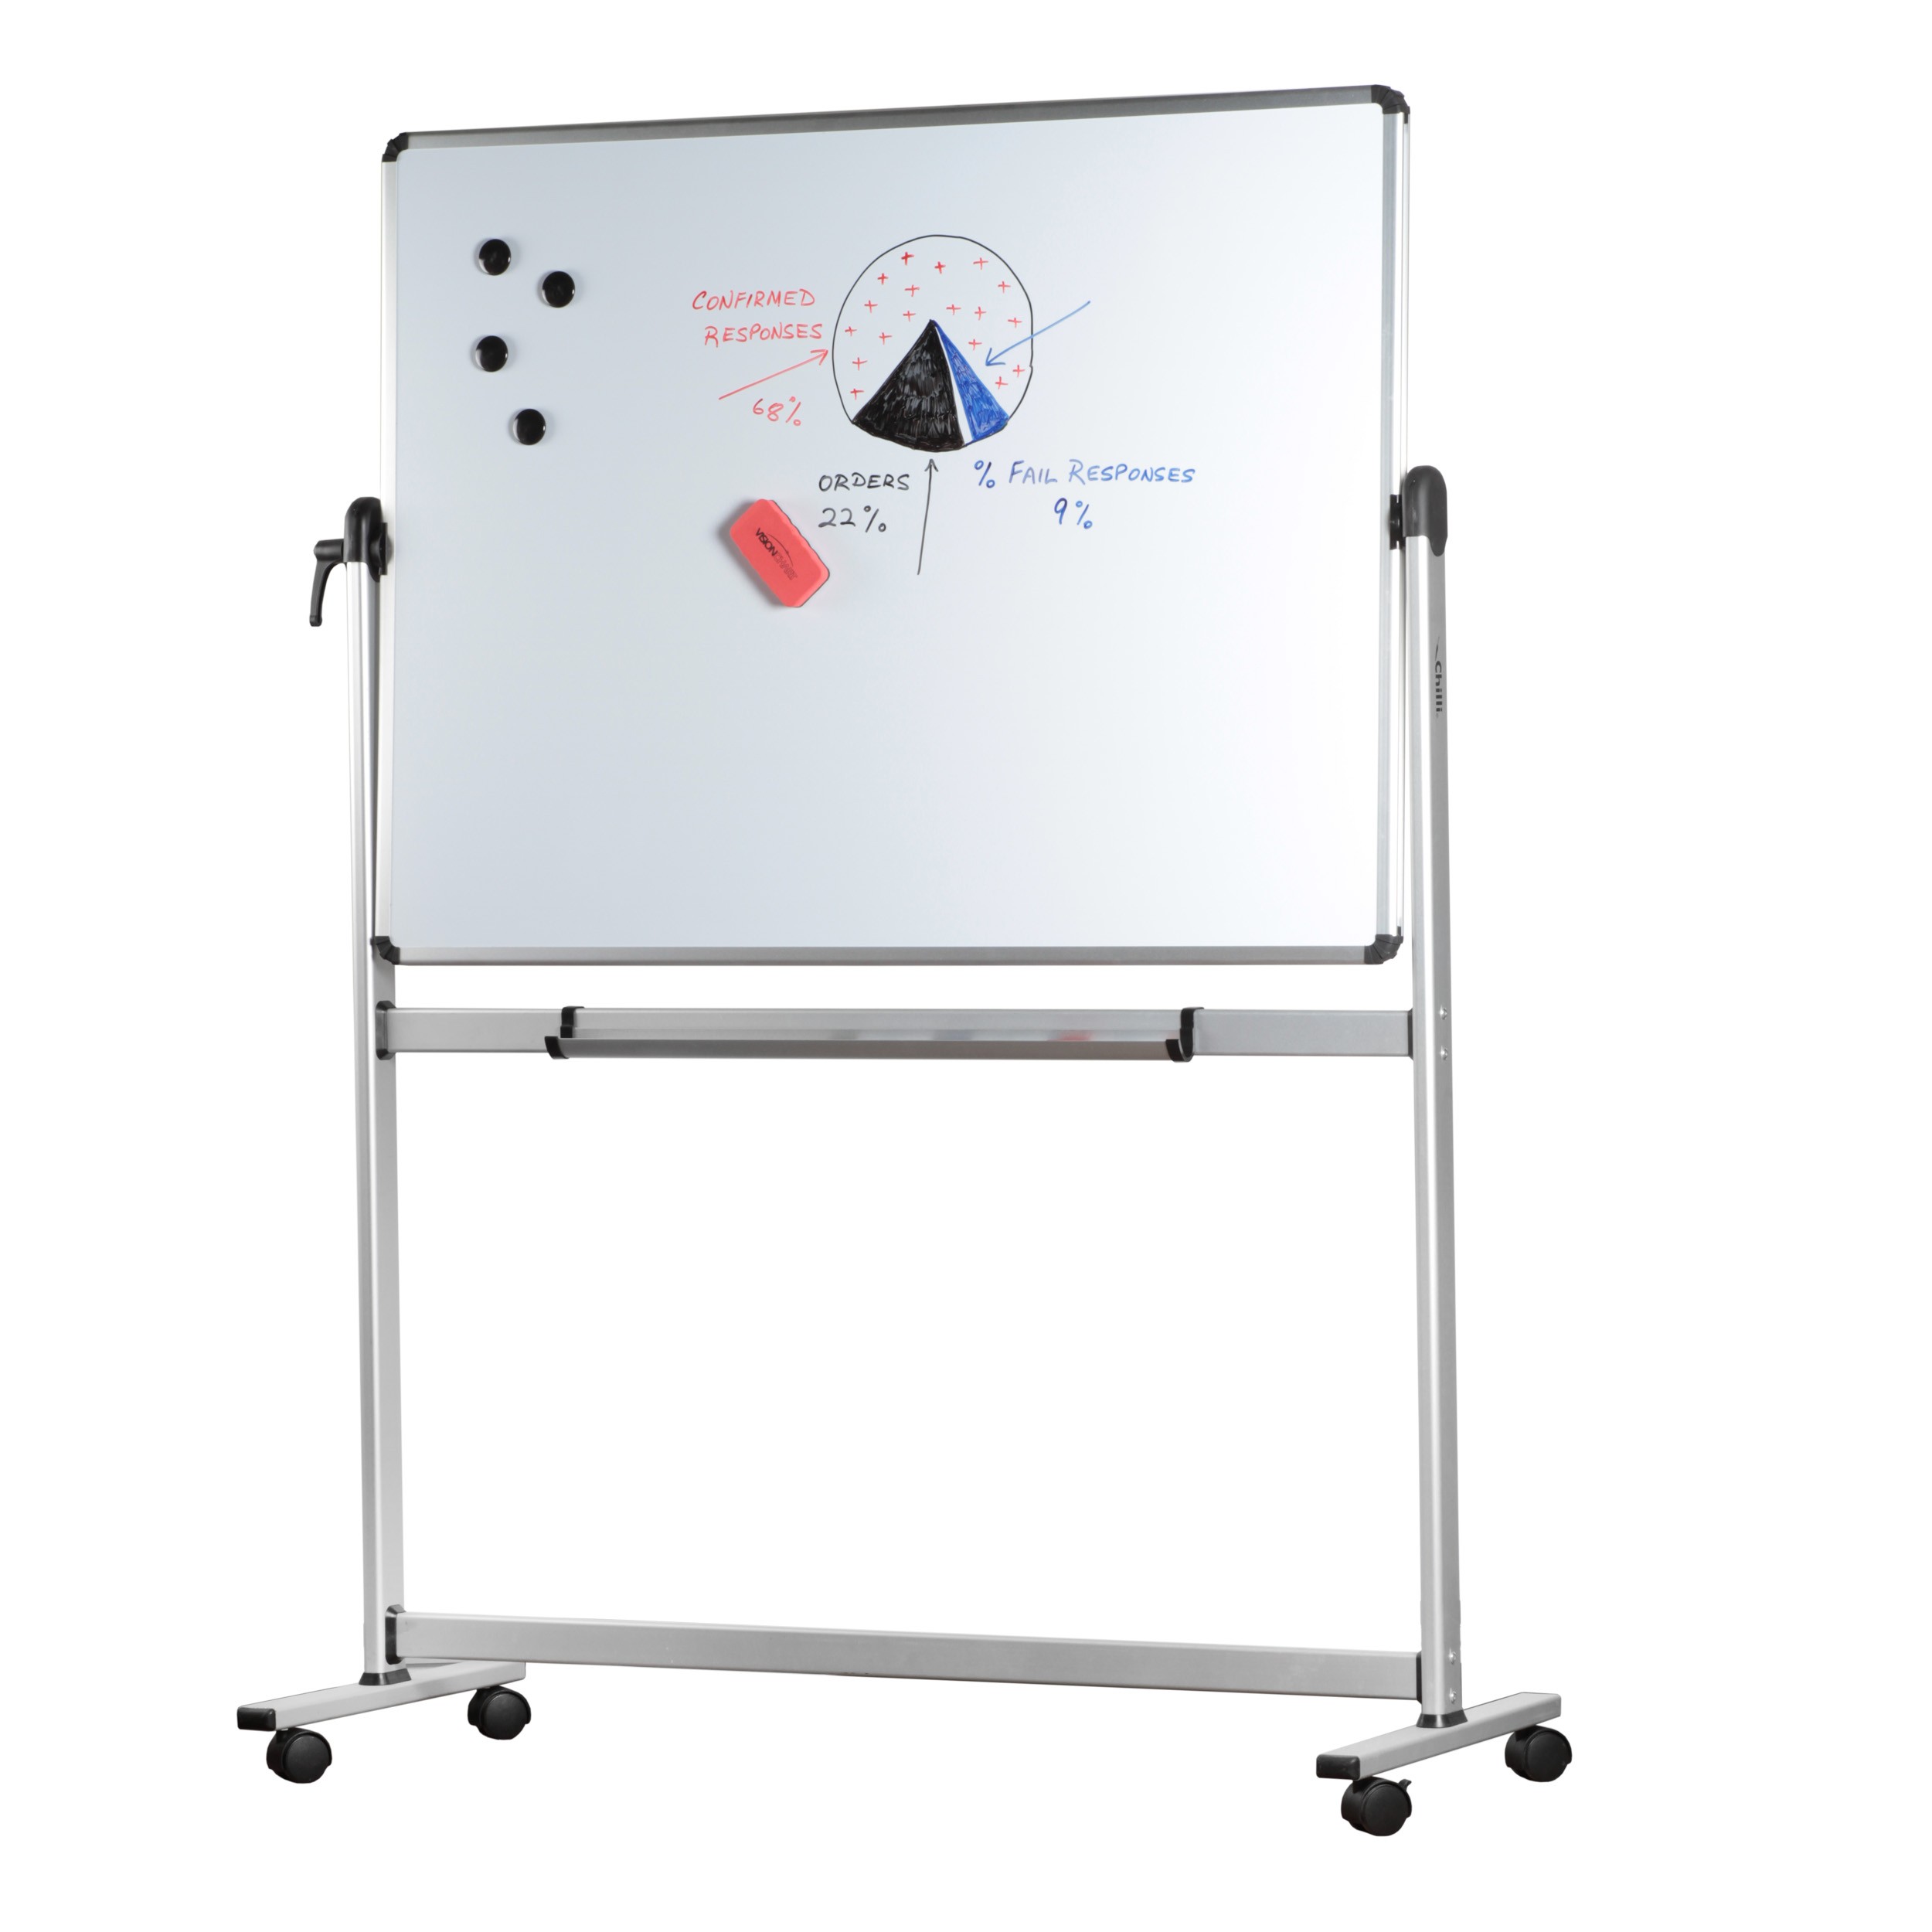 MOBILE WHITEBOARD WITH STAND 1800mm x 1200mm DOUBLE SIDED